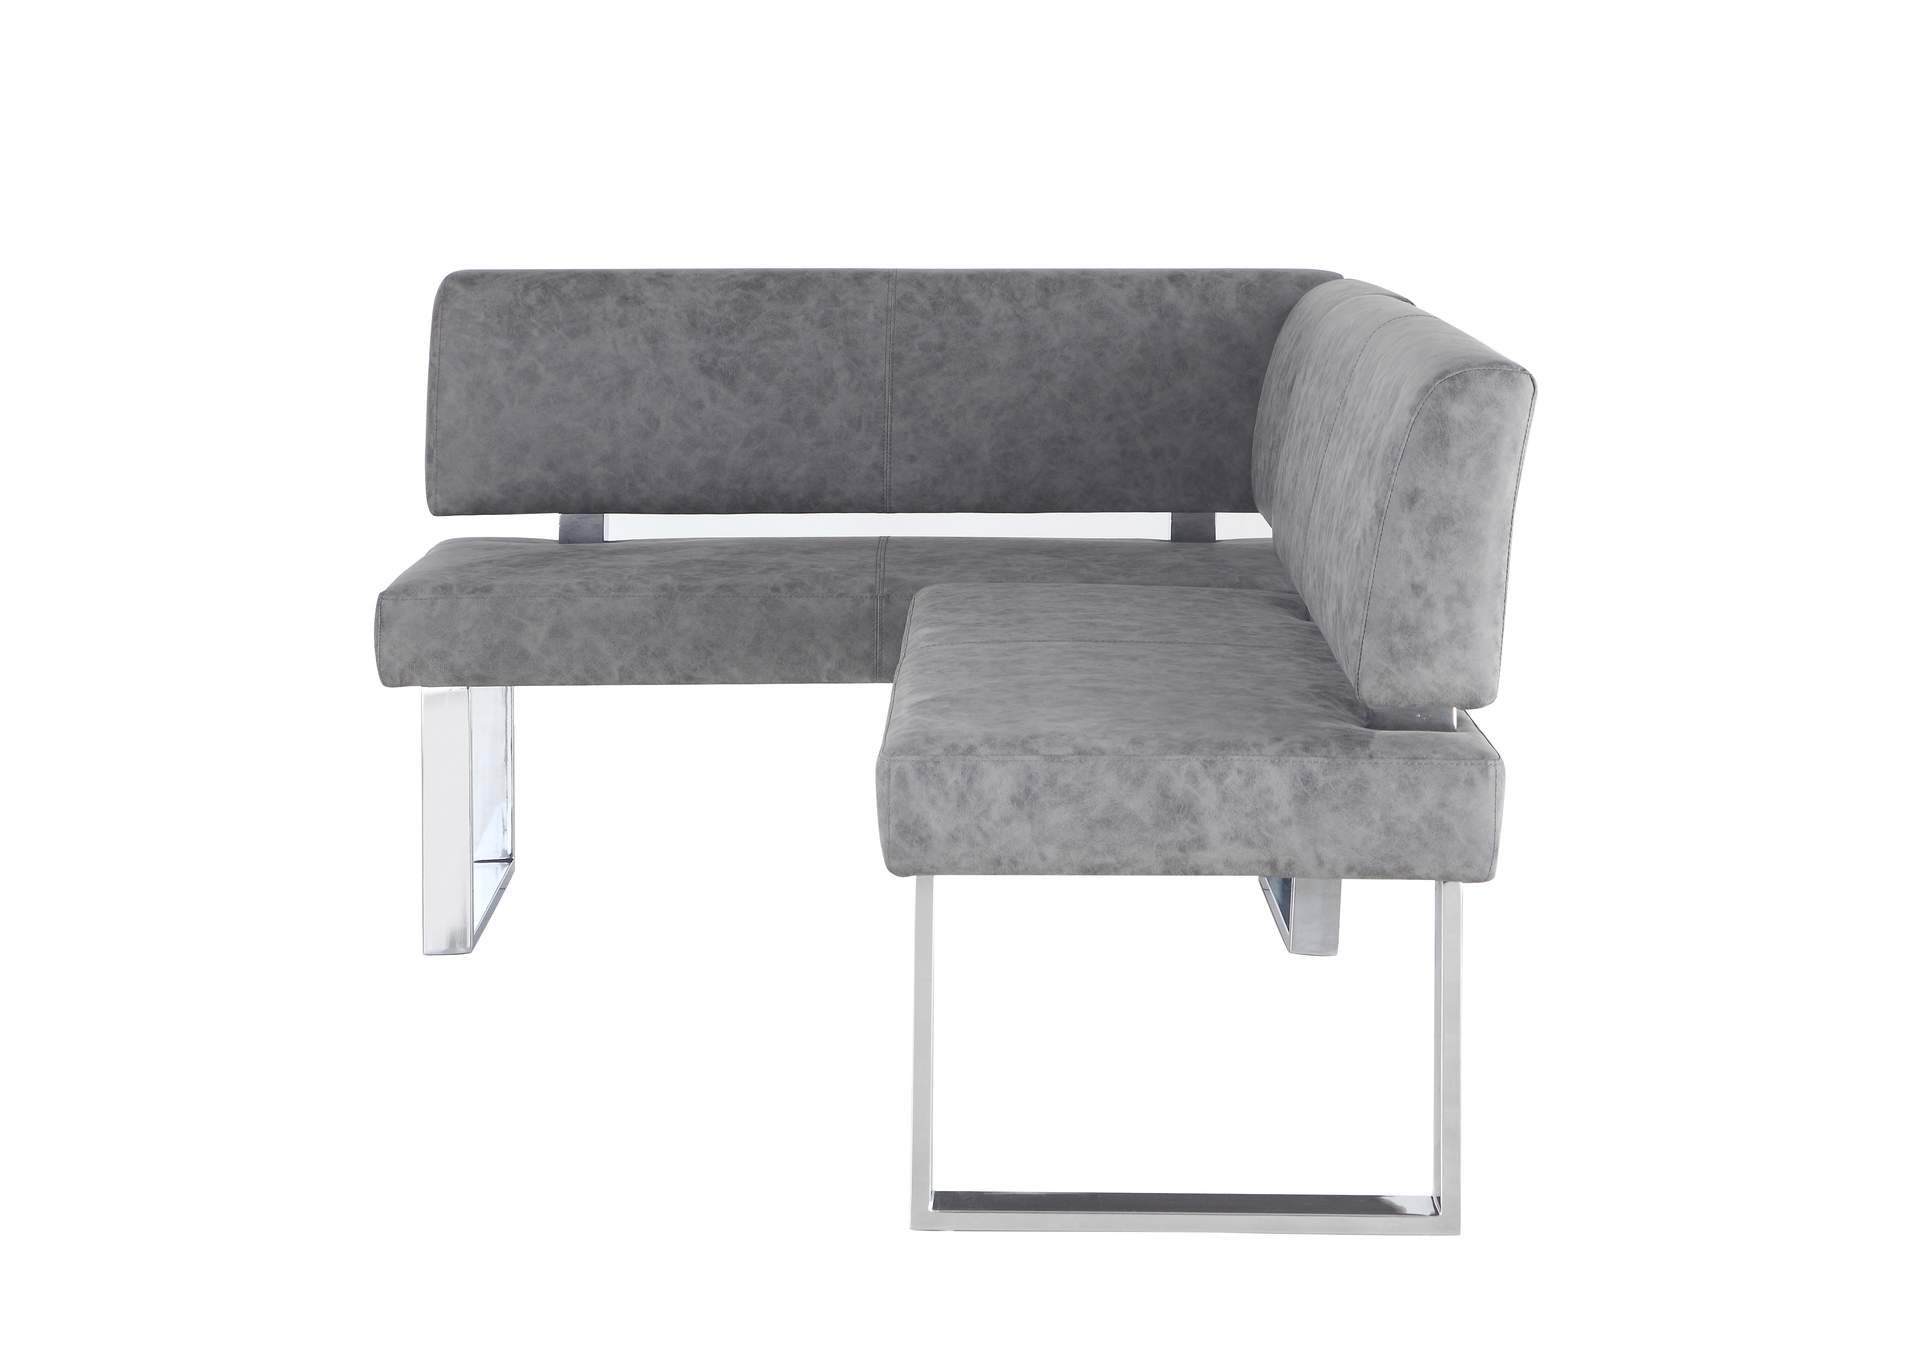 Modern Gray Reversible Upholstered Nook,Chintaly Imports